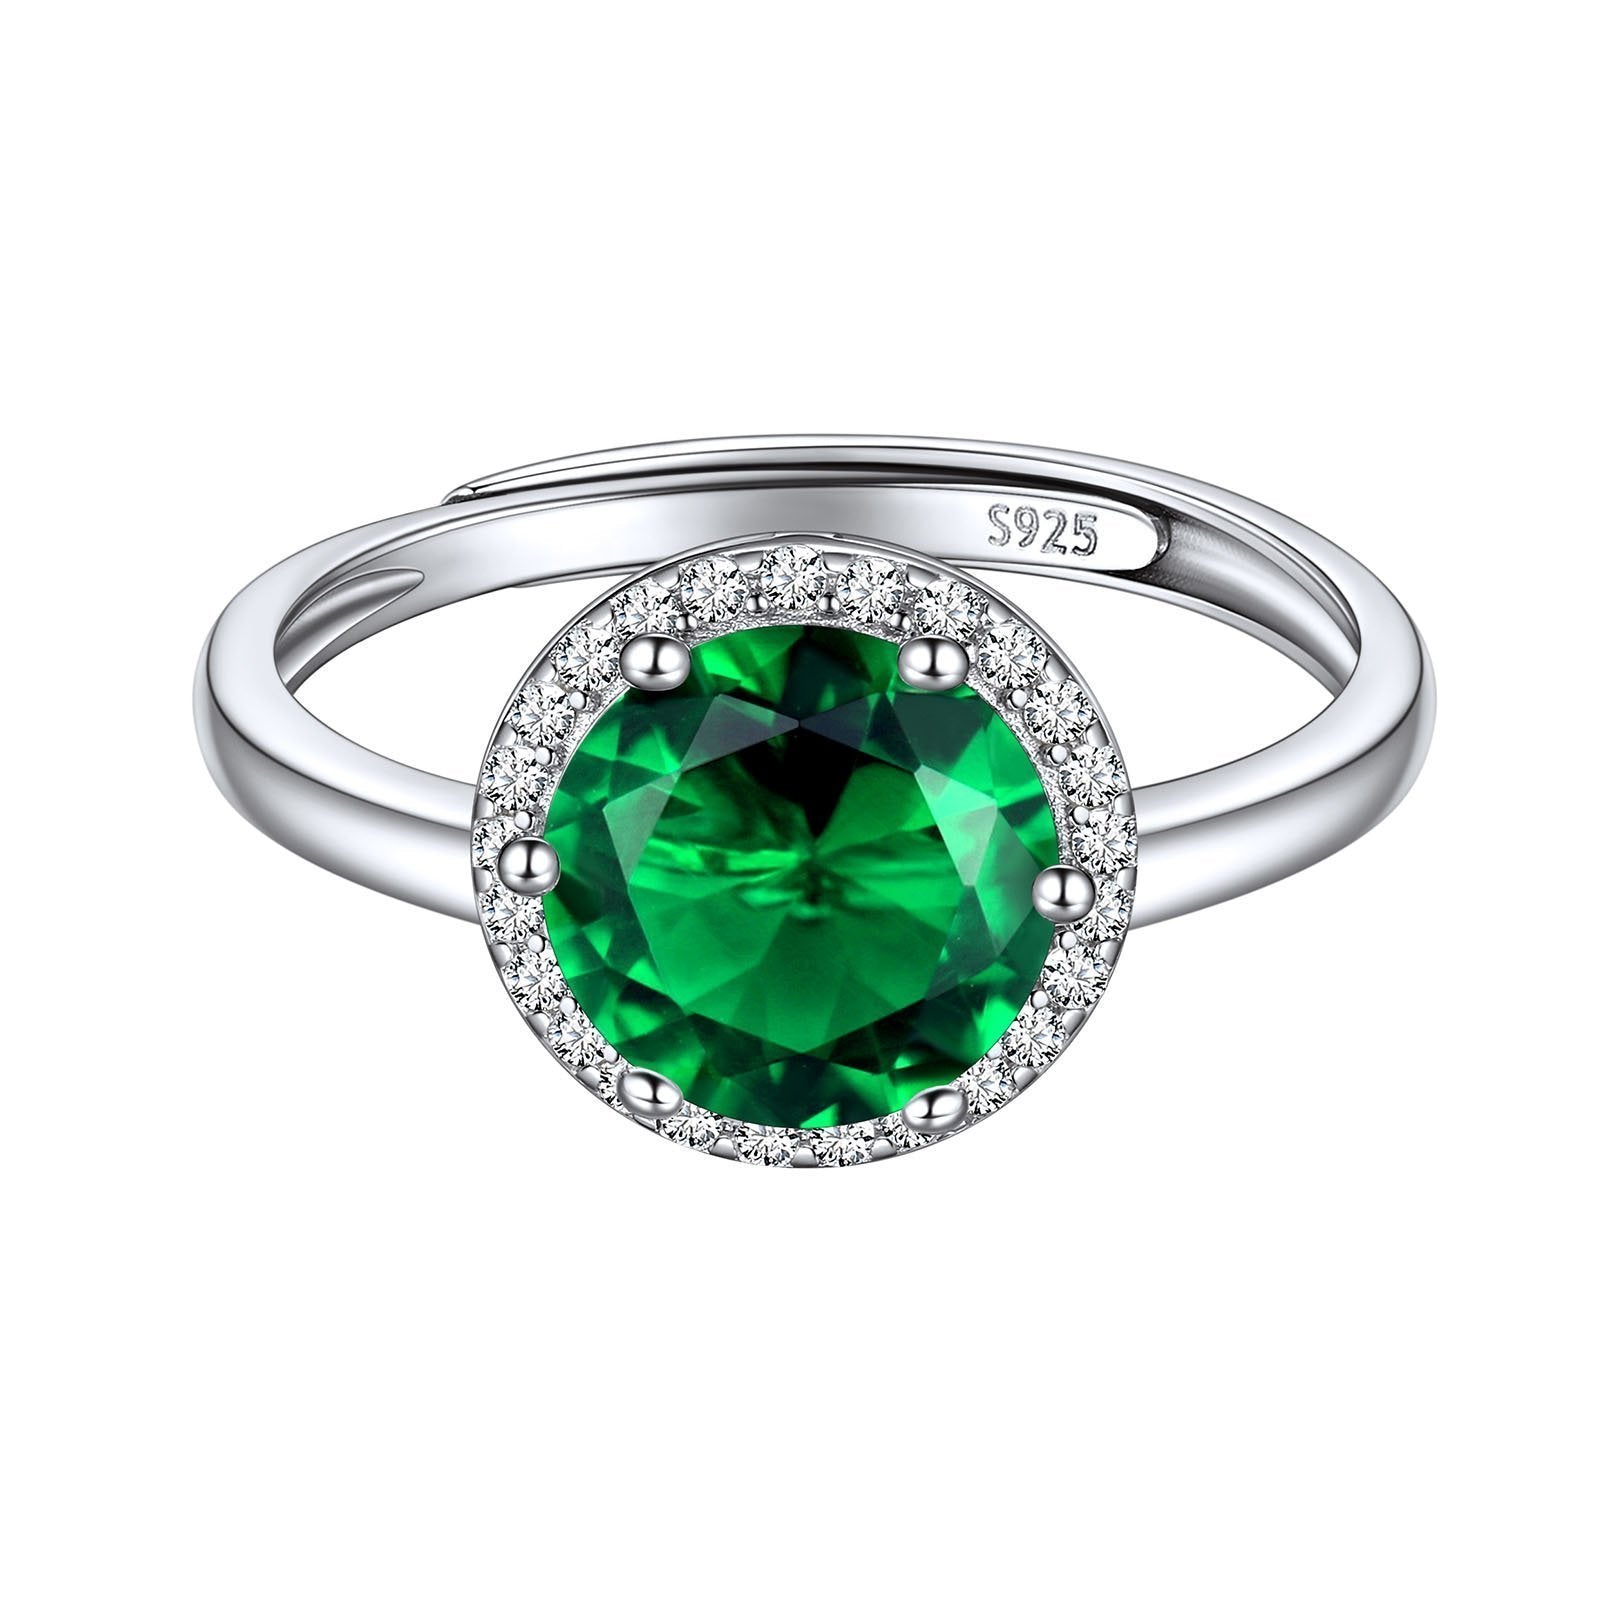 August Birthstone Peridot Halo Promise Ring Sterling Silver Round Cut BIRTHSTONES JEWELRY